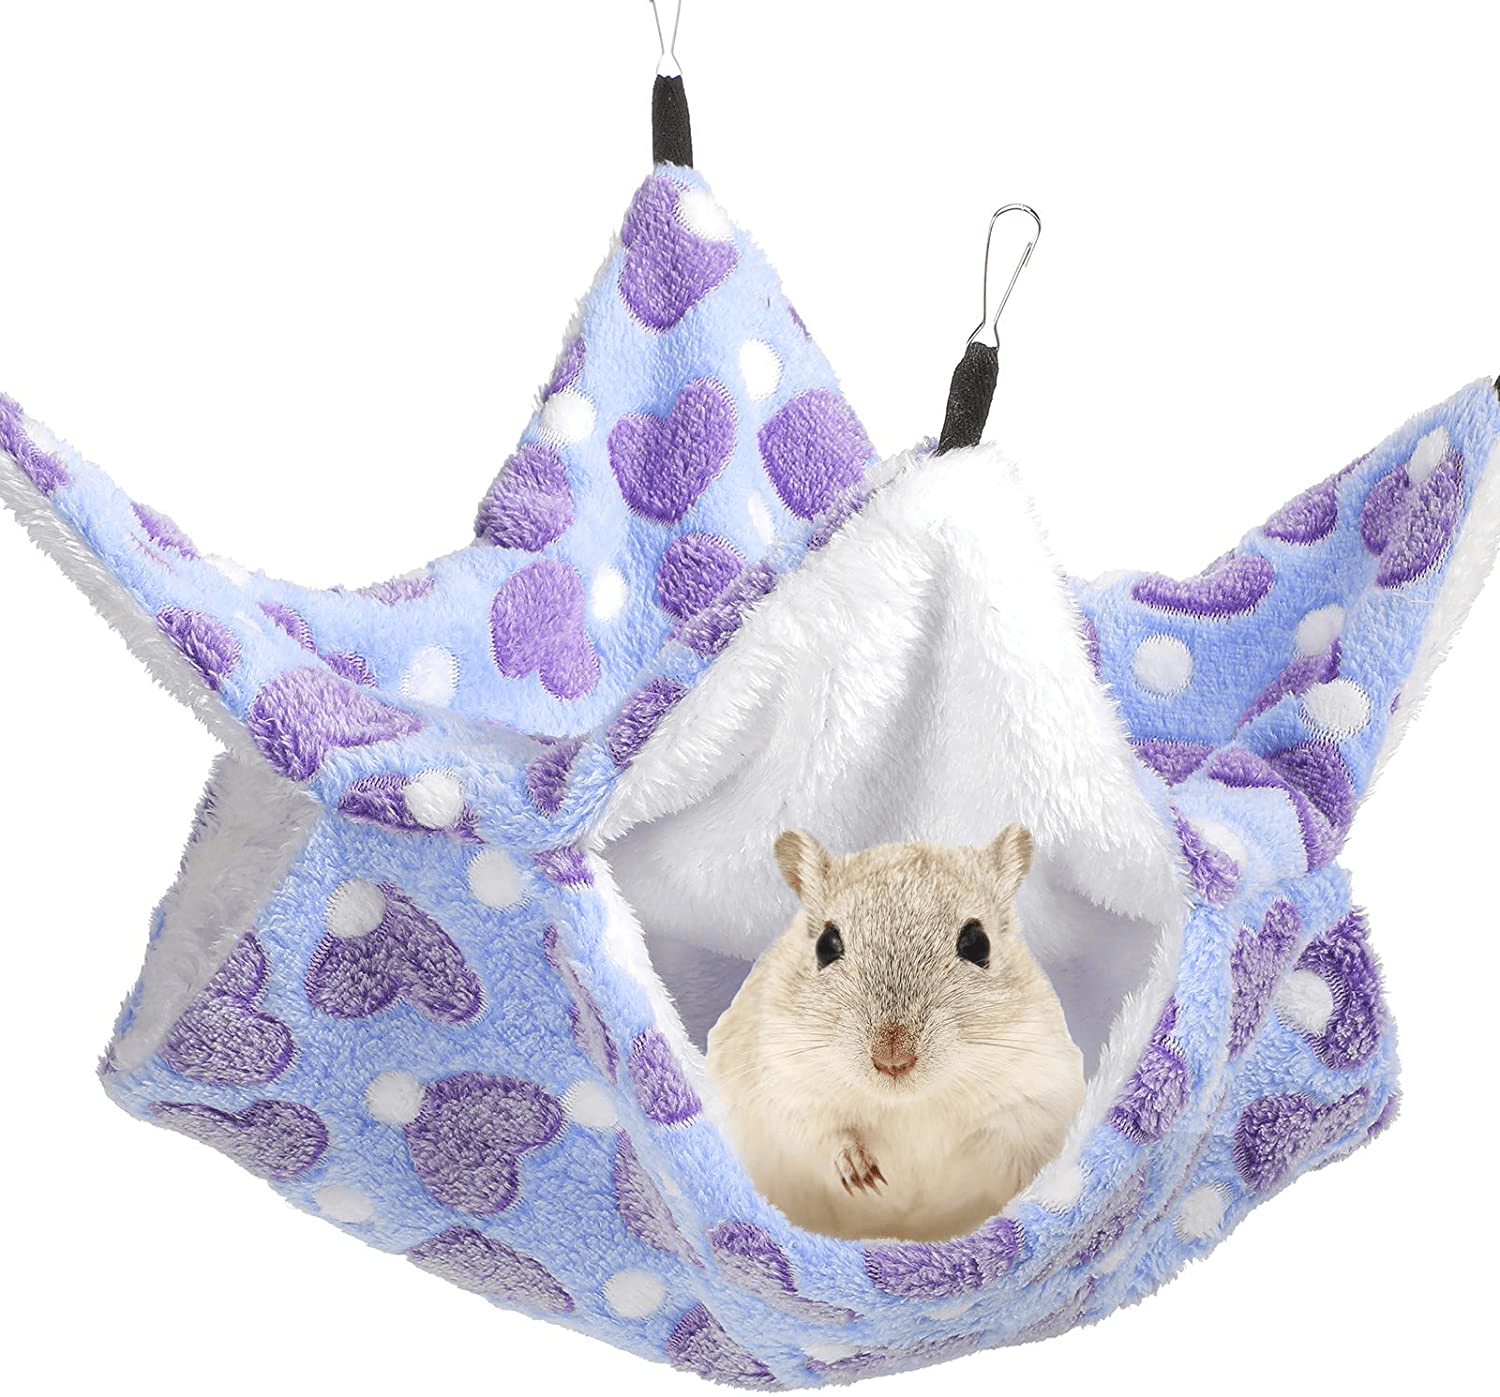 Ferret Cage Toys Hammock Hamster Bed Hammock Sugar Glider Toys Small Animals Hanging Warm Bed Leaf Hanging Tunnel and Swing for Sugar Glider 5 Pcs Hamster Cage Guinea Pig Cage Accessories 